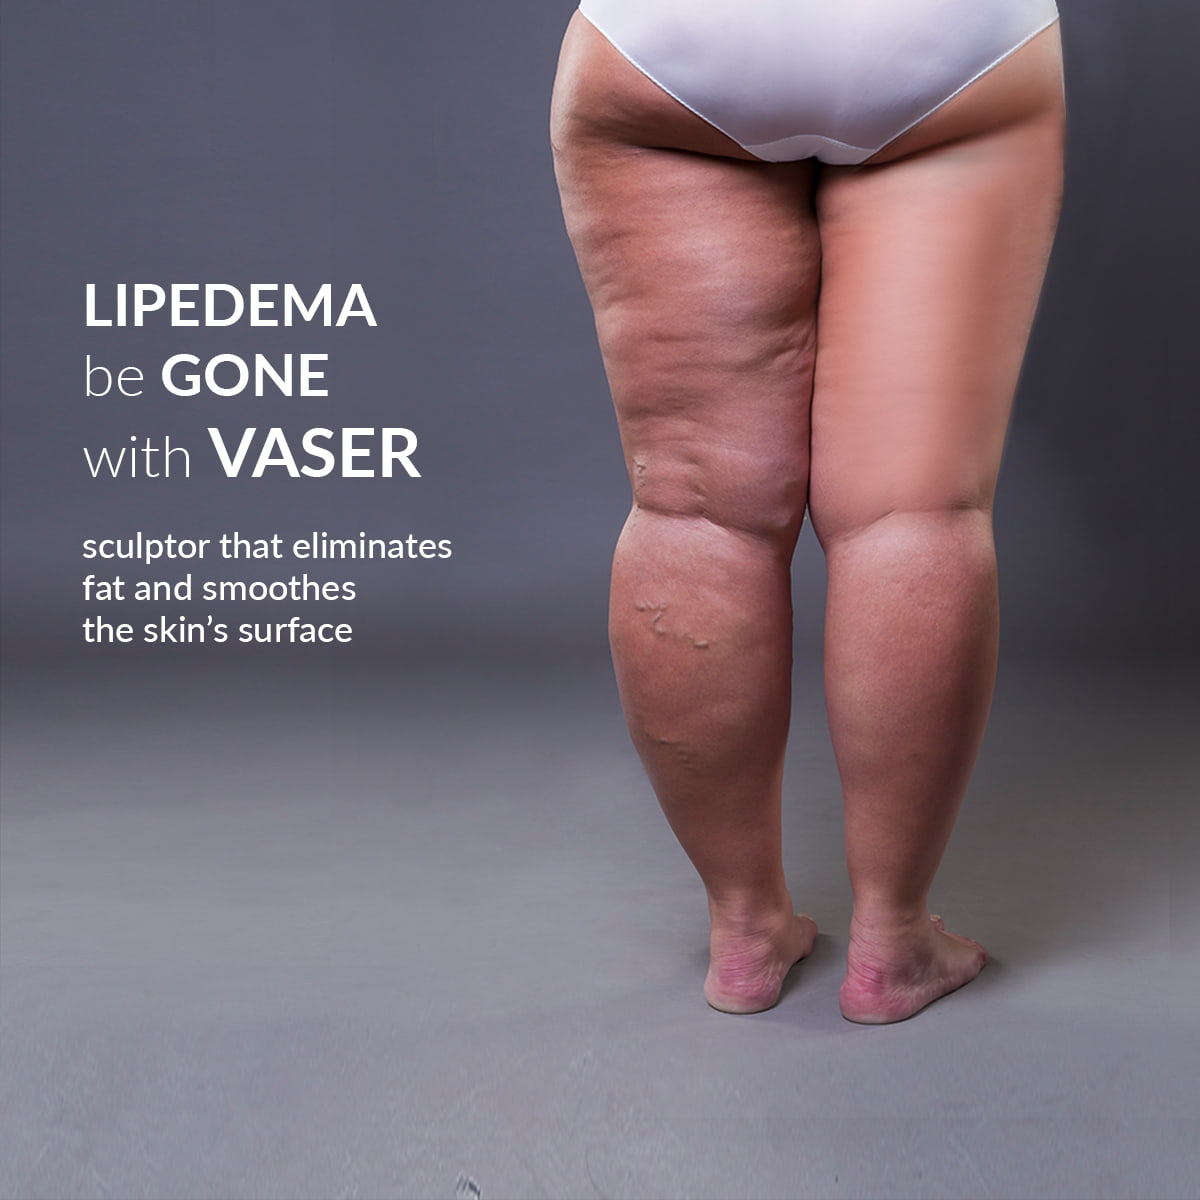 There's Something My Surgeon Wants You to Know About Lipedema